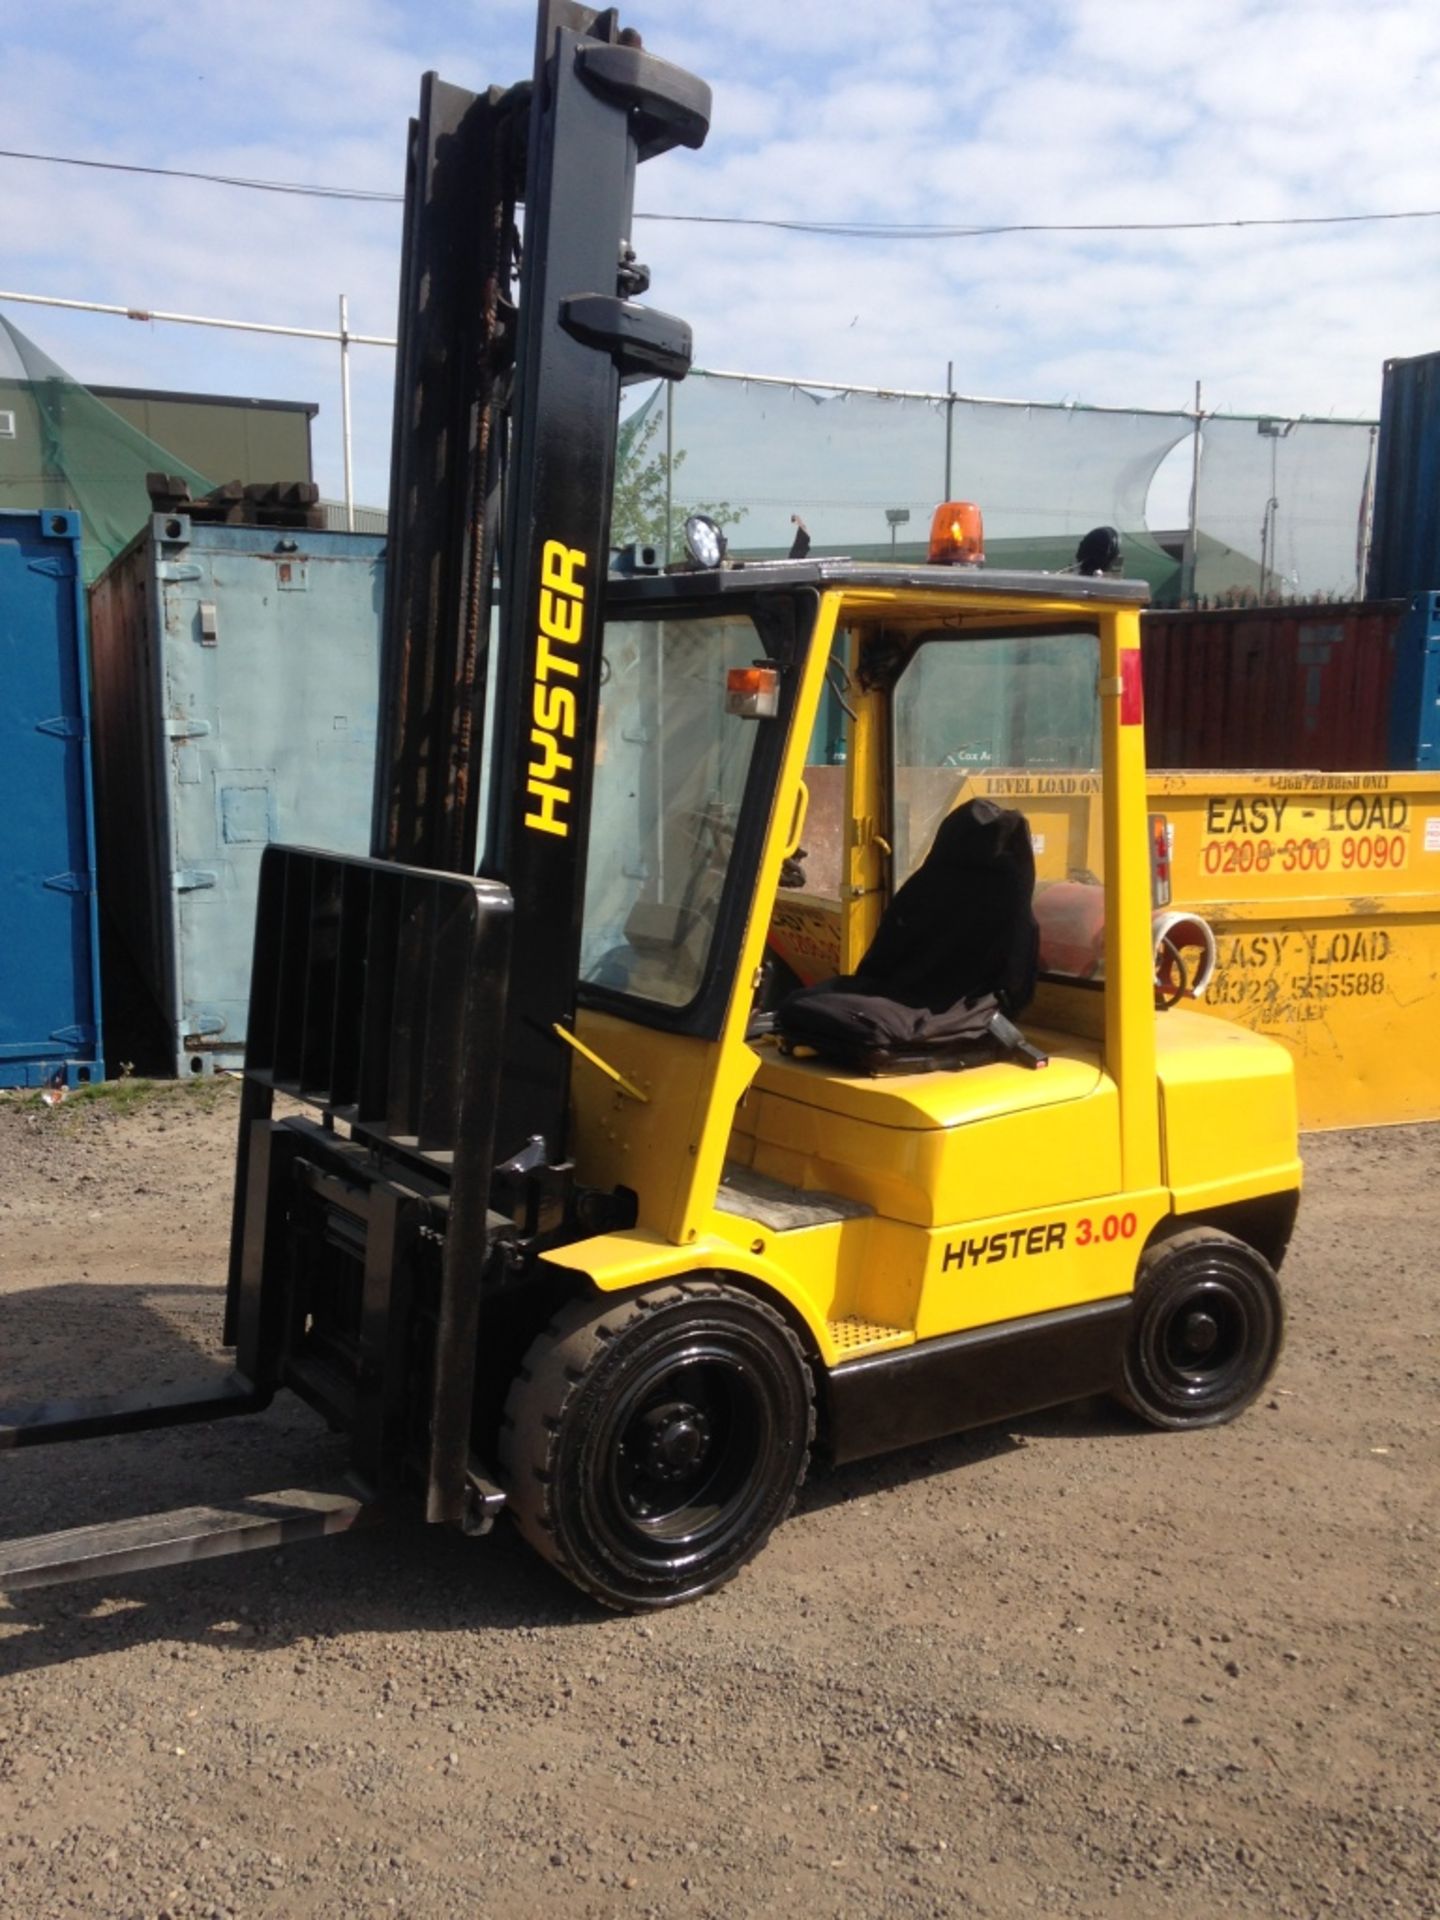 Hyster 3.00 gas forklift